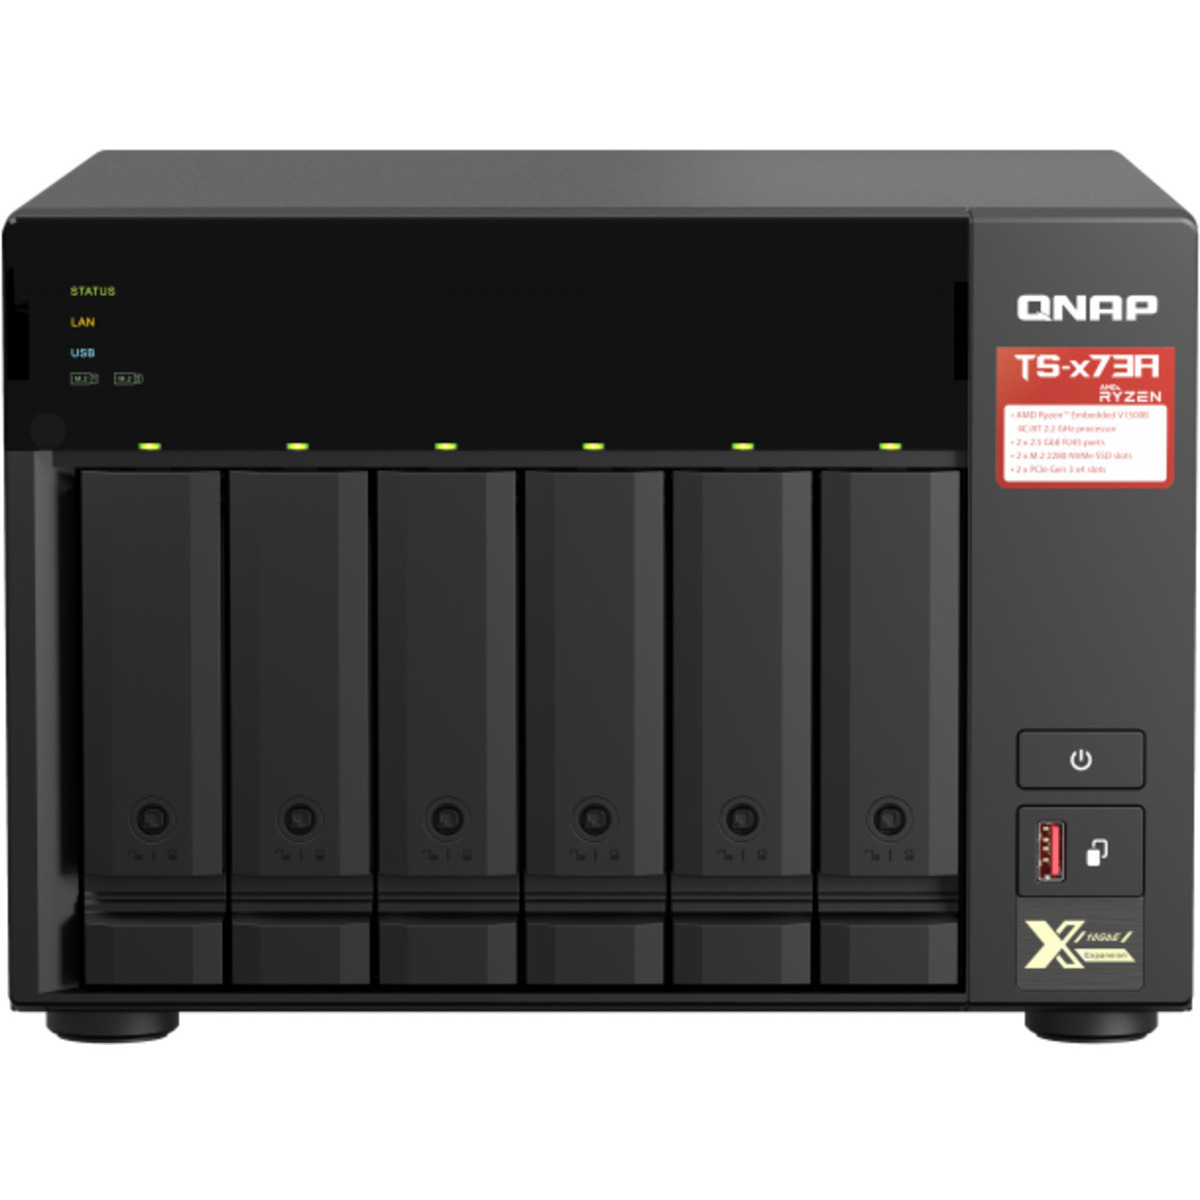 buy QNAP TS-673A 24tb Desktop NAS - Network Attached Storage Device 6x4000gb Toshiba MN Series MN08ADA400E 3.5 7200rpm SATA 6Gb/s HDD NAS Class Drives Installed - Burn-In Tested - ON SALE - nas headquarters buy network attached storage server device das new raid-5 free shipping simply usa TS-673A